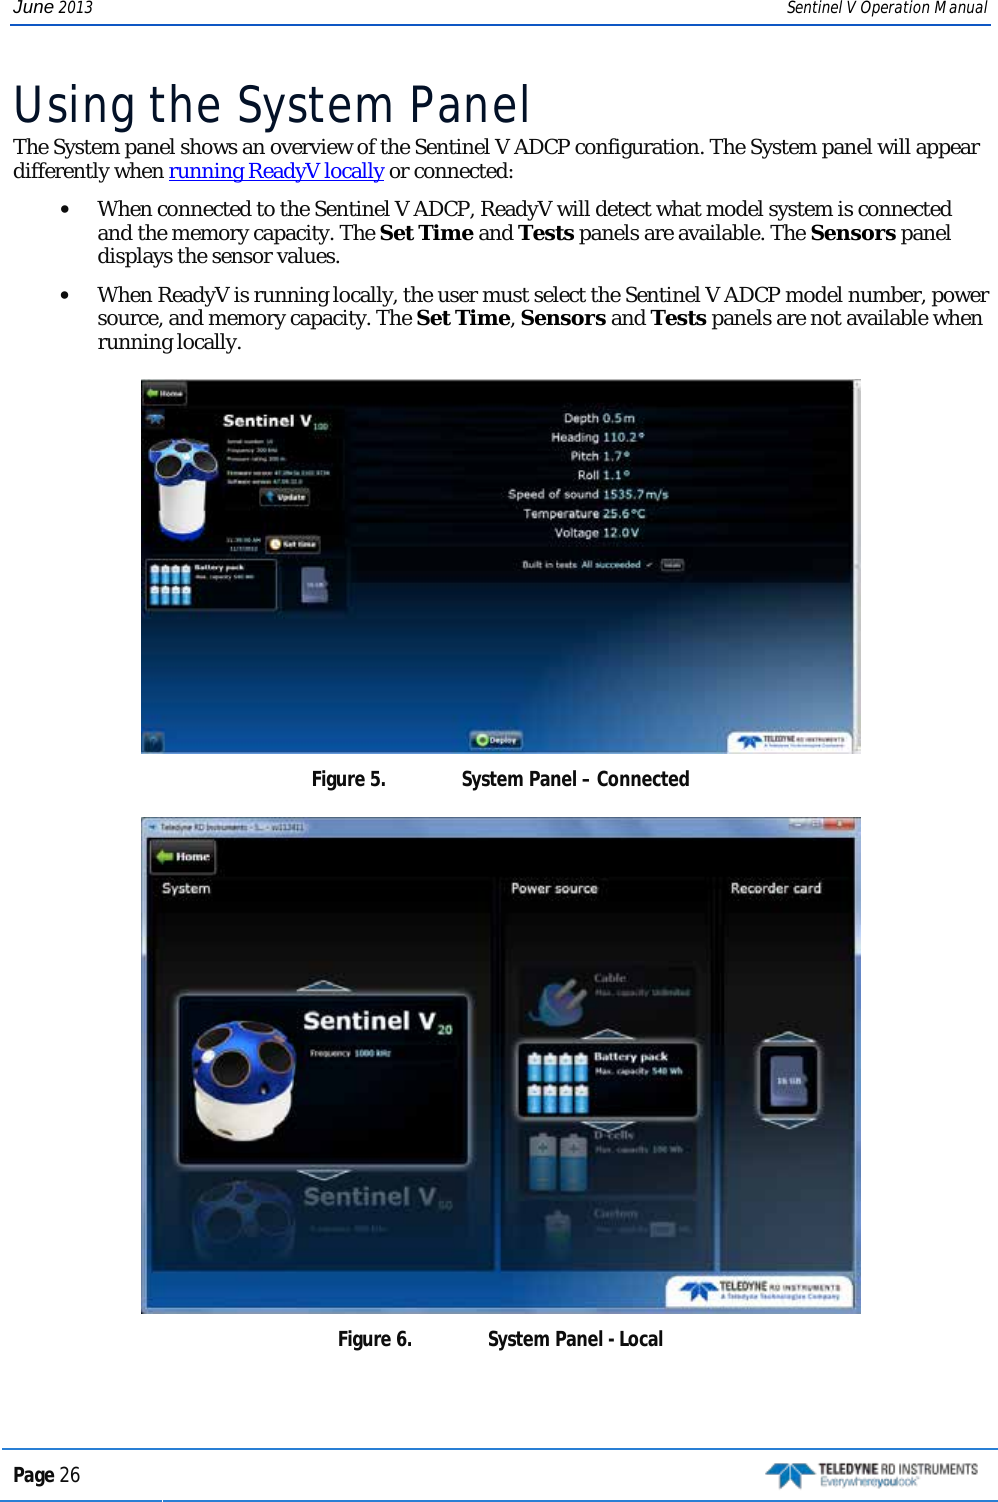 June 2013 Sentinel V Operation Manual Using the System Panel The System panel shows an overview of the Sentinel V ADCP configuration. The System panel will appear differently when running ReadyV locally or connected:   • When connected to the Sentinel V ADCP, ReadyV will detect what model system is connected and the memory capacity. The Set Time and Tests panels are available. The Sensors panel displays the sensor values.  • When ReadyV is running locally, the user must select the Sentinel V ADCP model number, power source, and memory capacity. The Set Time, Sensors and Tests panels are not available when running locally.   Figure 5.  System Panel – Connected  Figure 6.  System Panel - Local  Page 26   